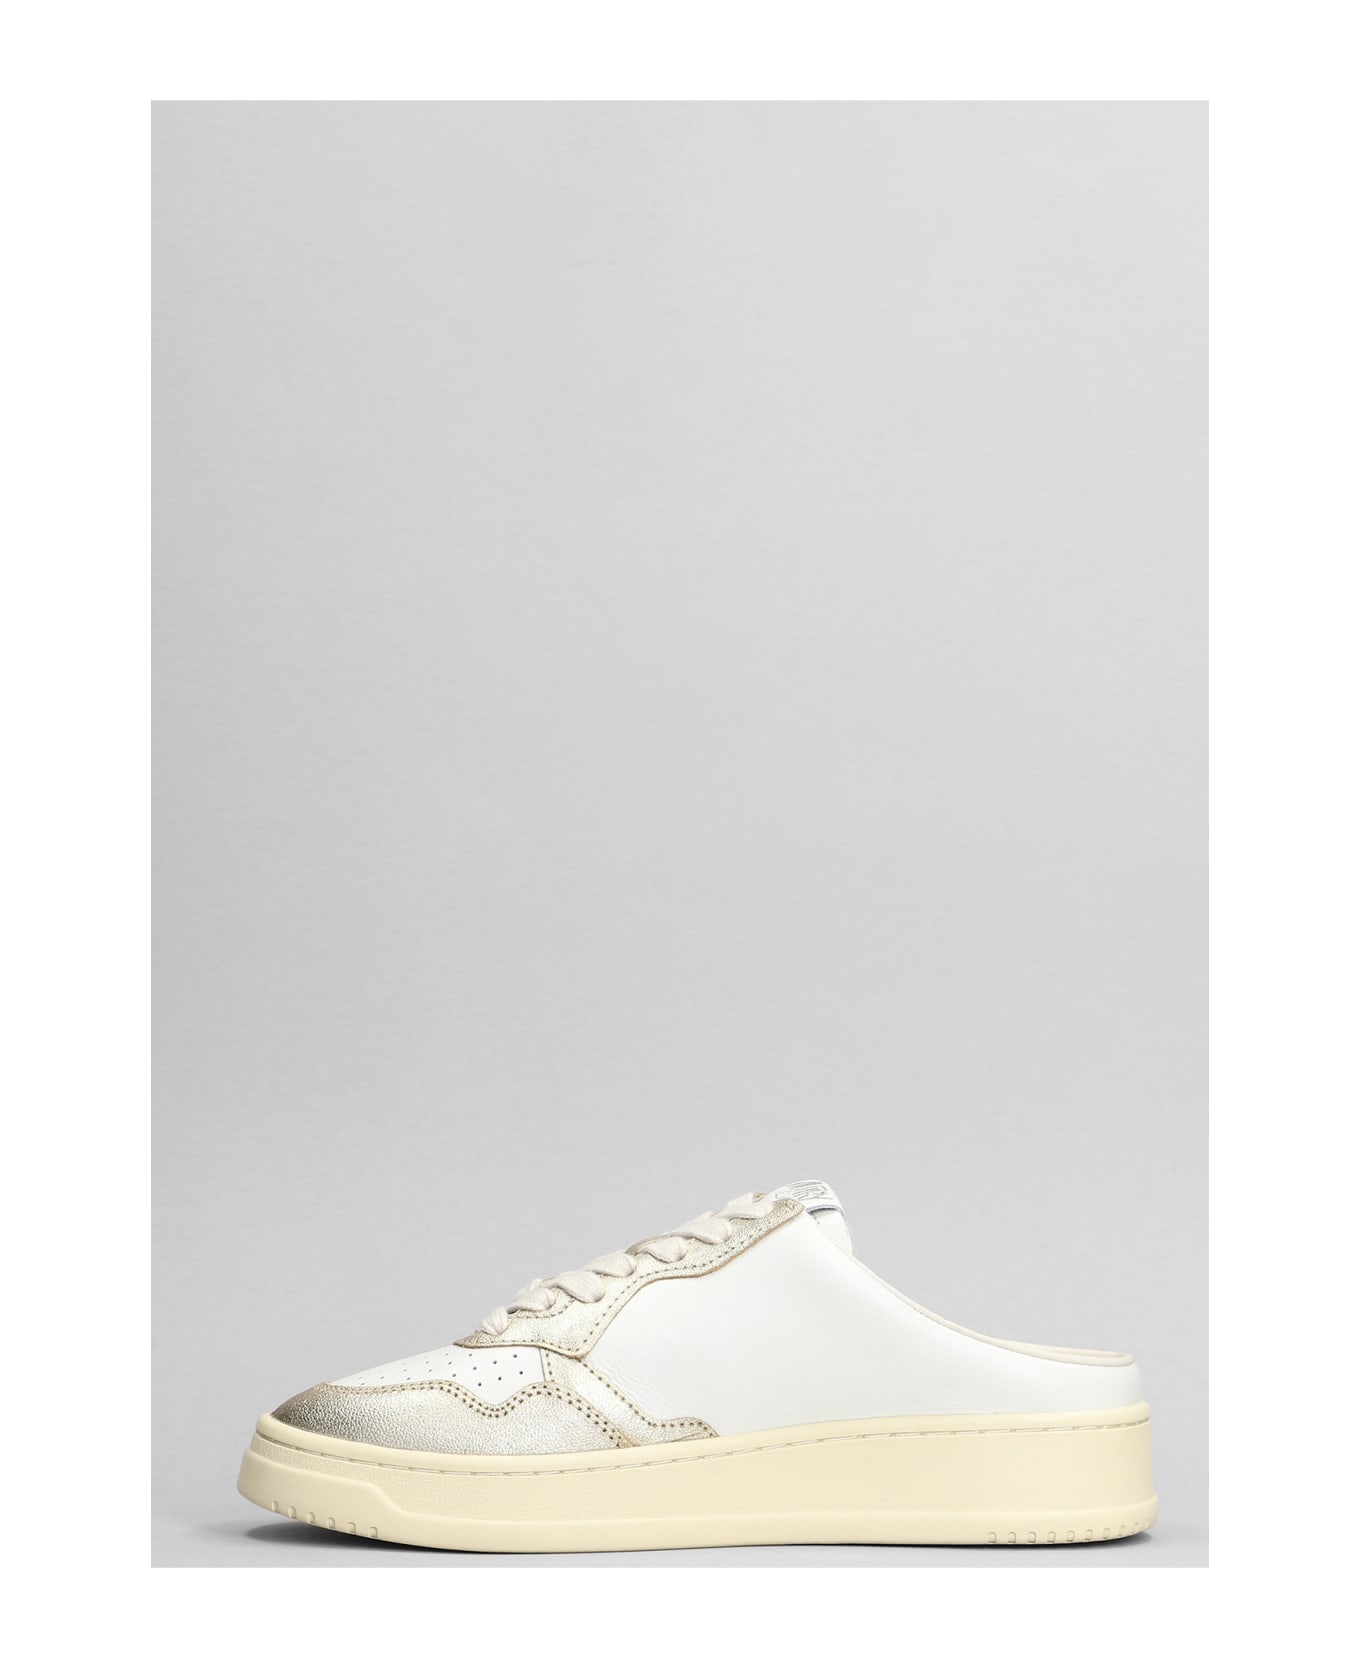 Autry Logo Patched Low Sneakers Mule - white スニーカー